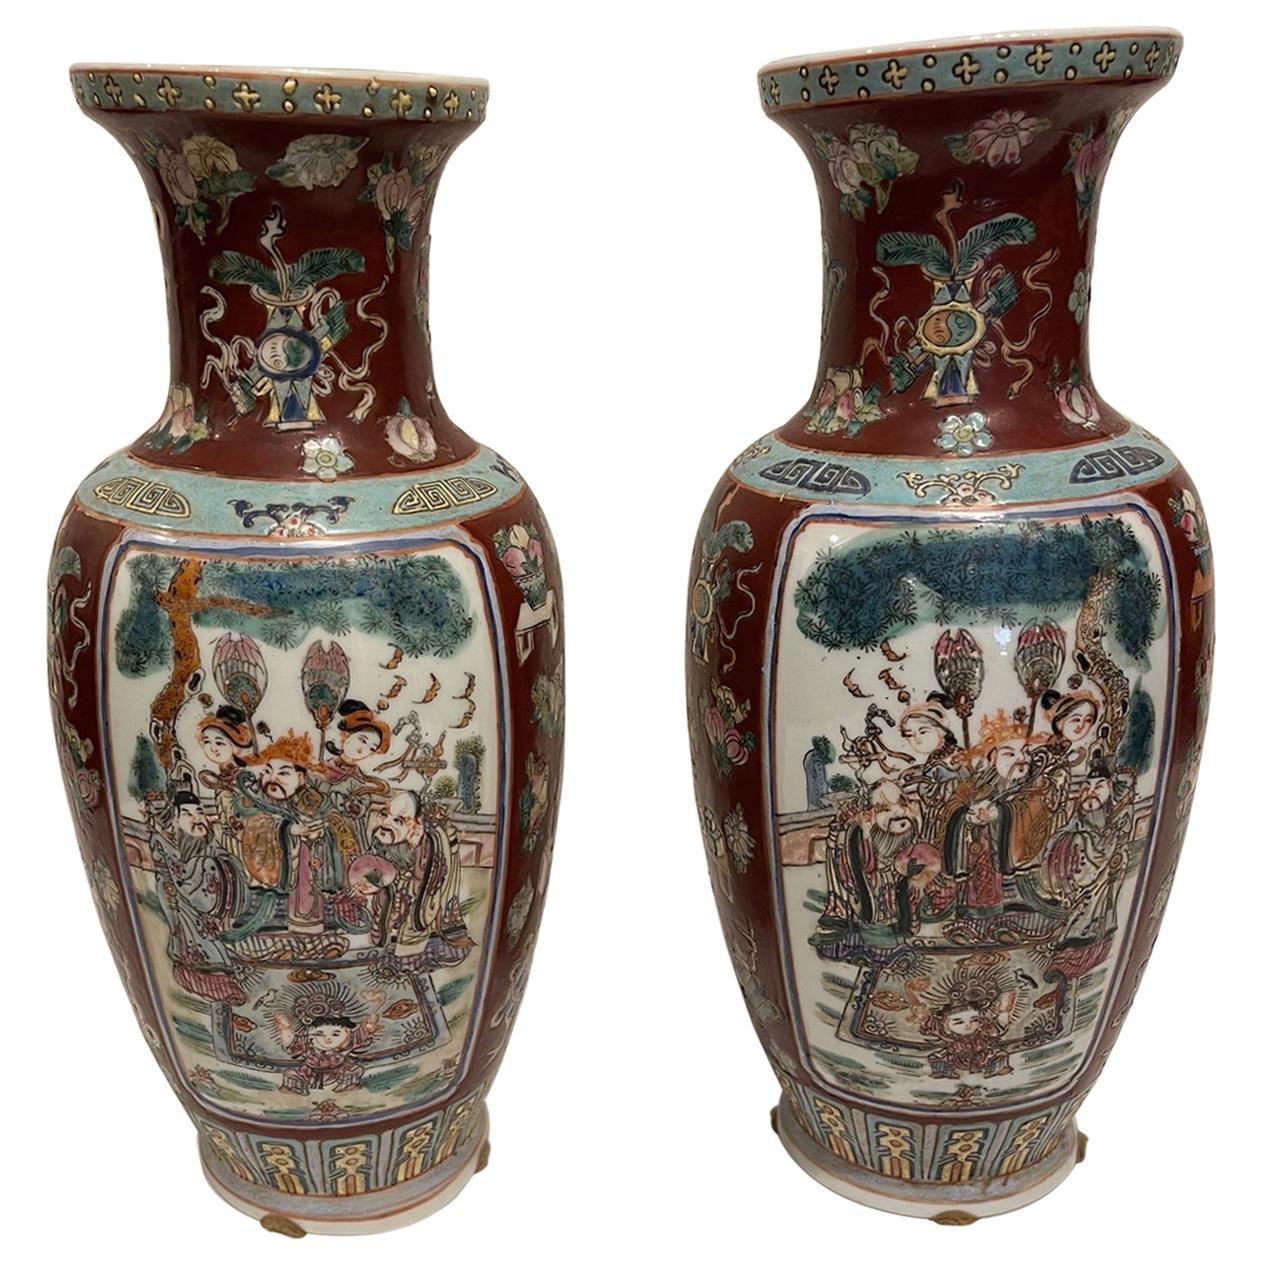 Pair of Japanese Style Porcelain Vases, 20th Century